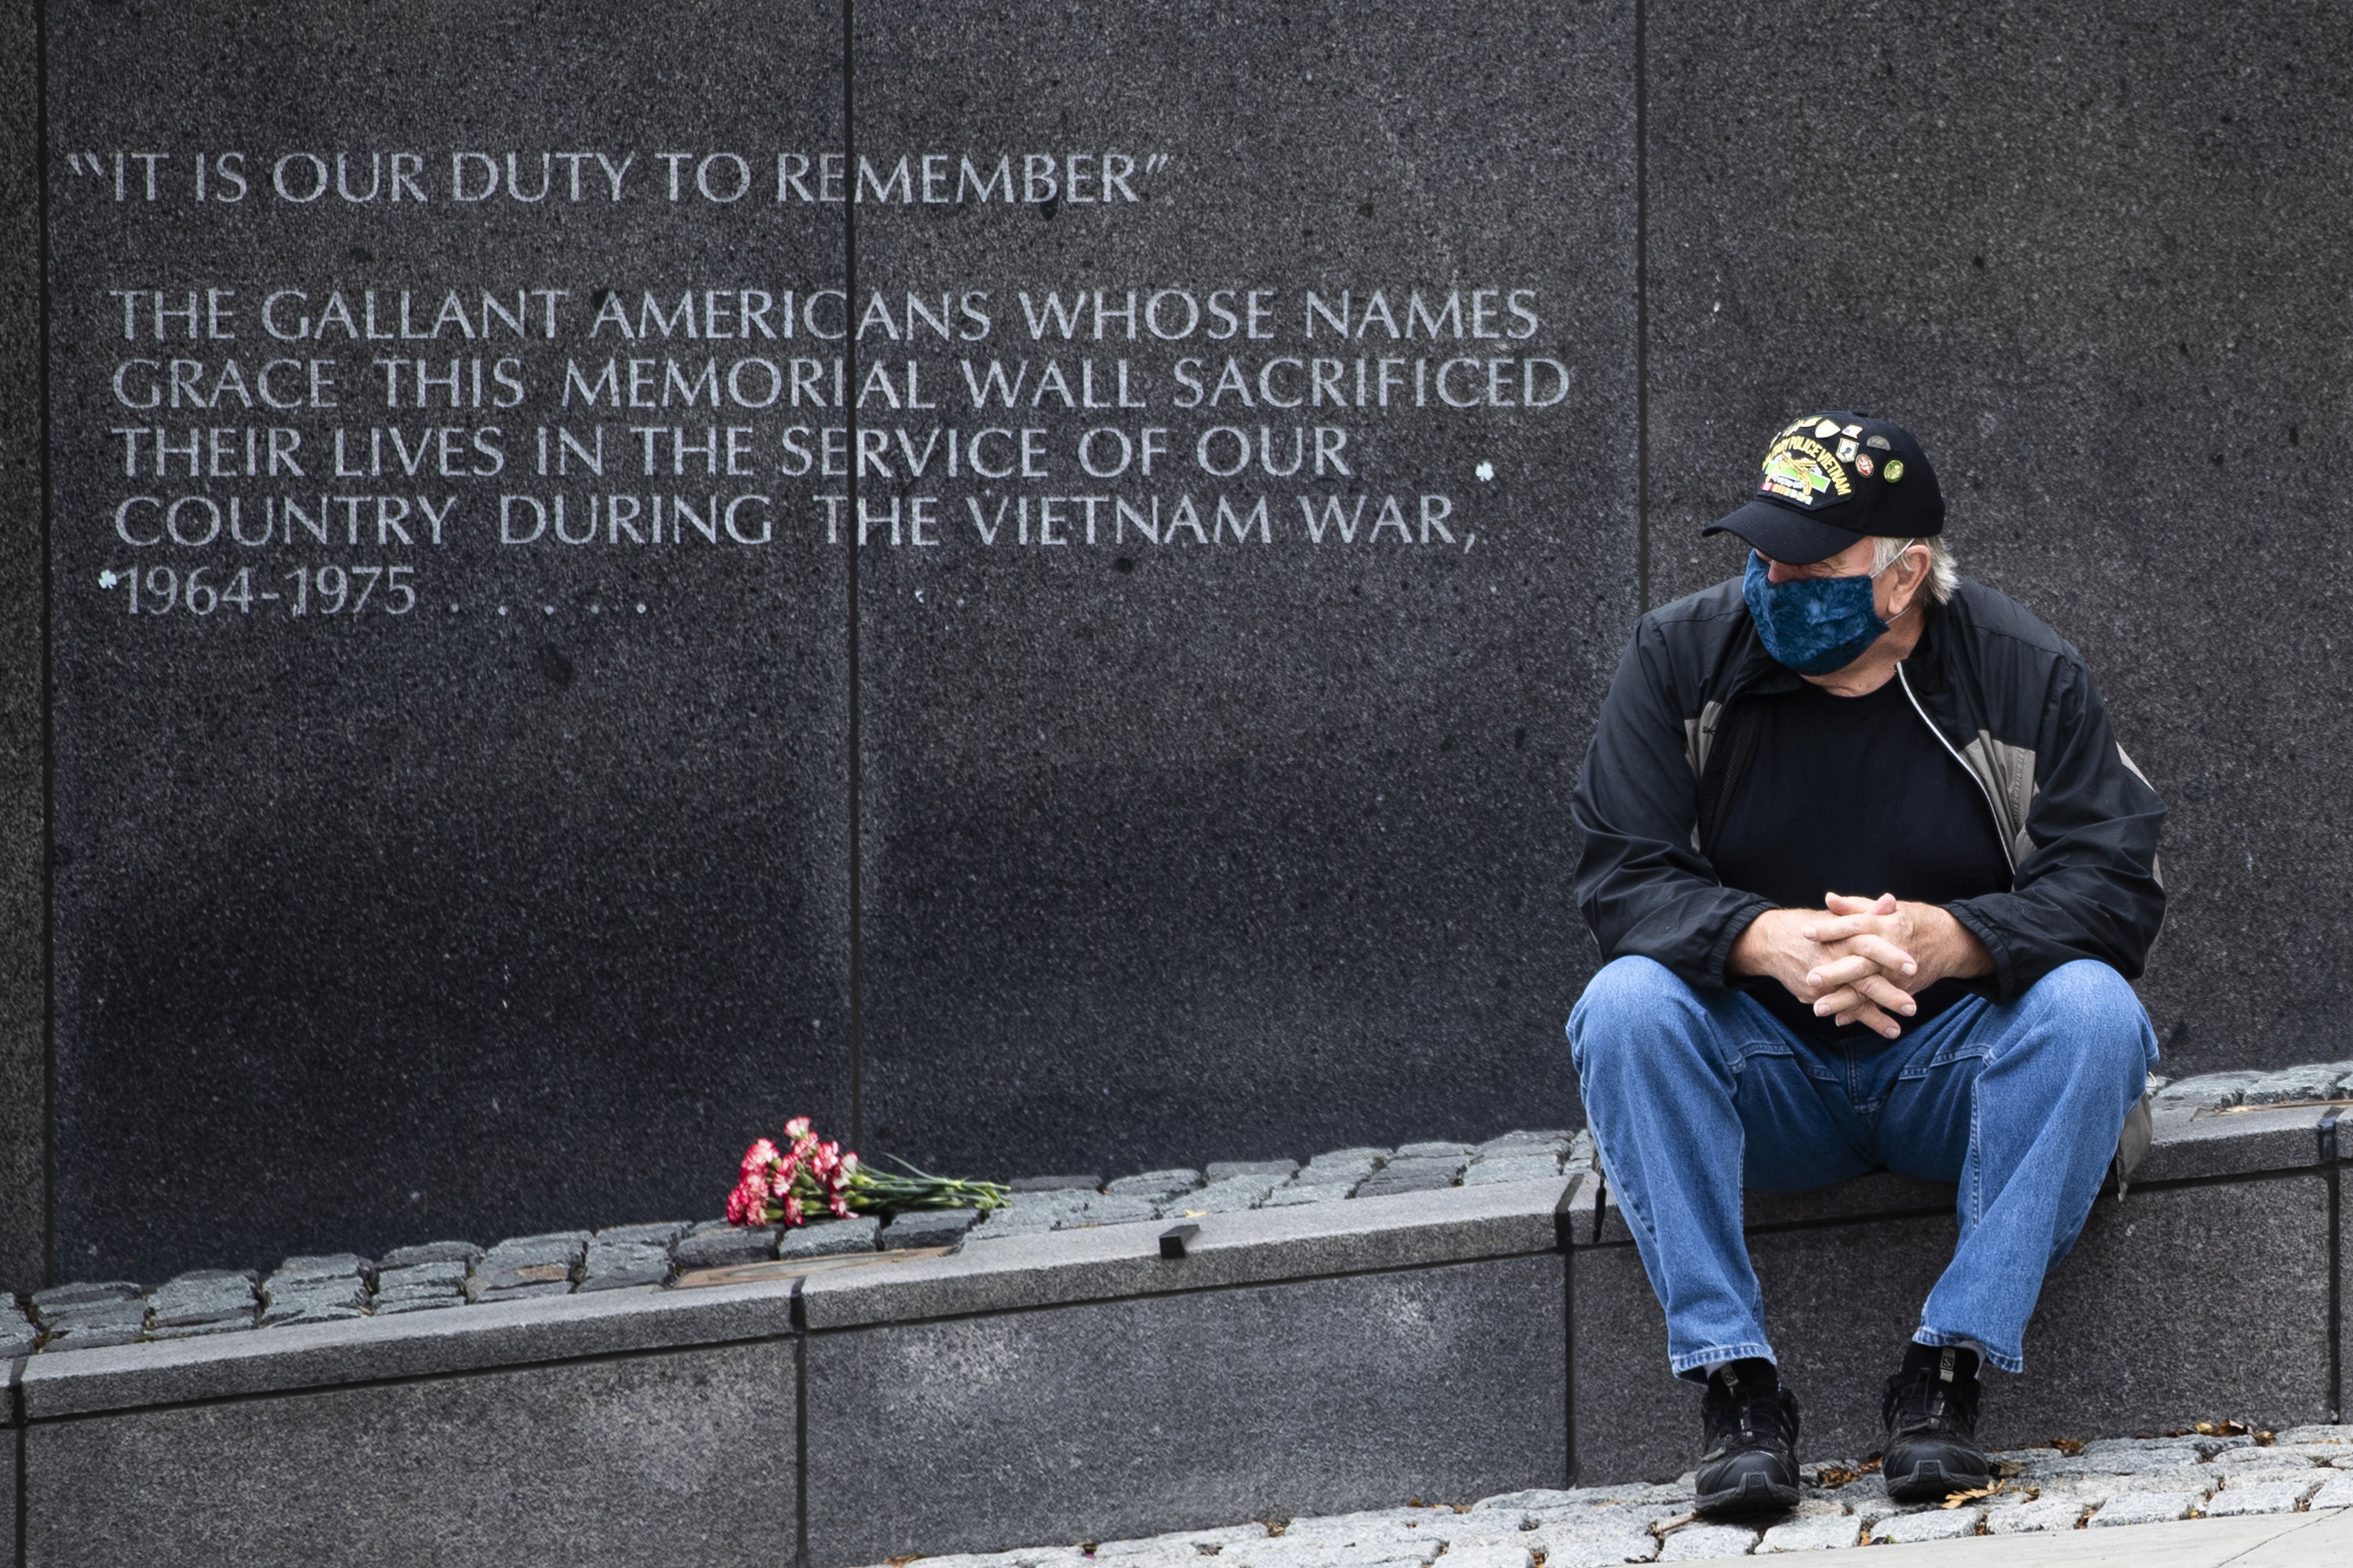 Vietnam Veteran Kitch Kichula, wearing a protective face mask as a precaution against the coronavirus, pays his respects at the at the Vietnam War Memorial, in Philadelphia, on Memorial Day